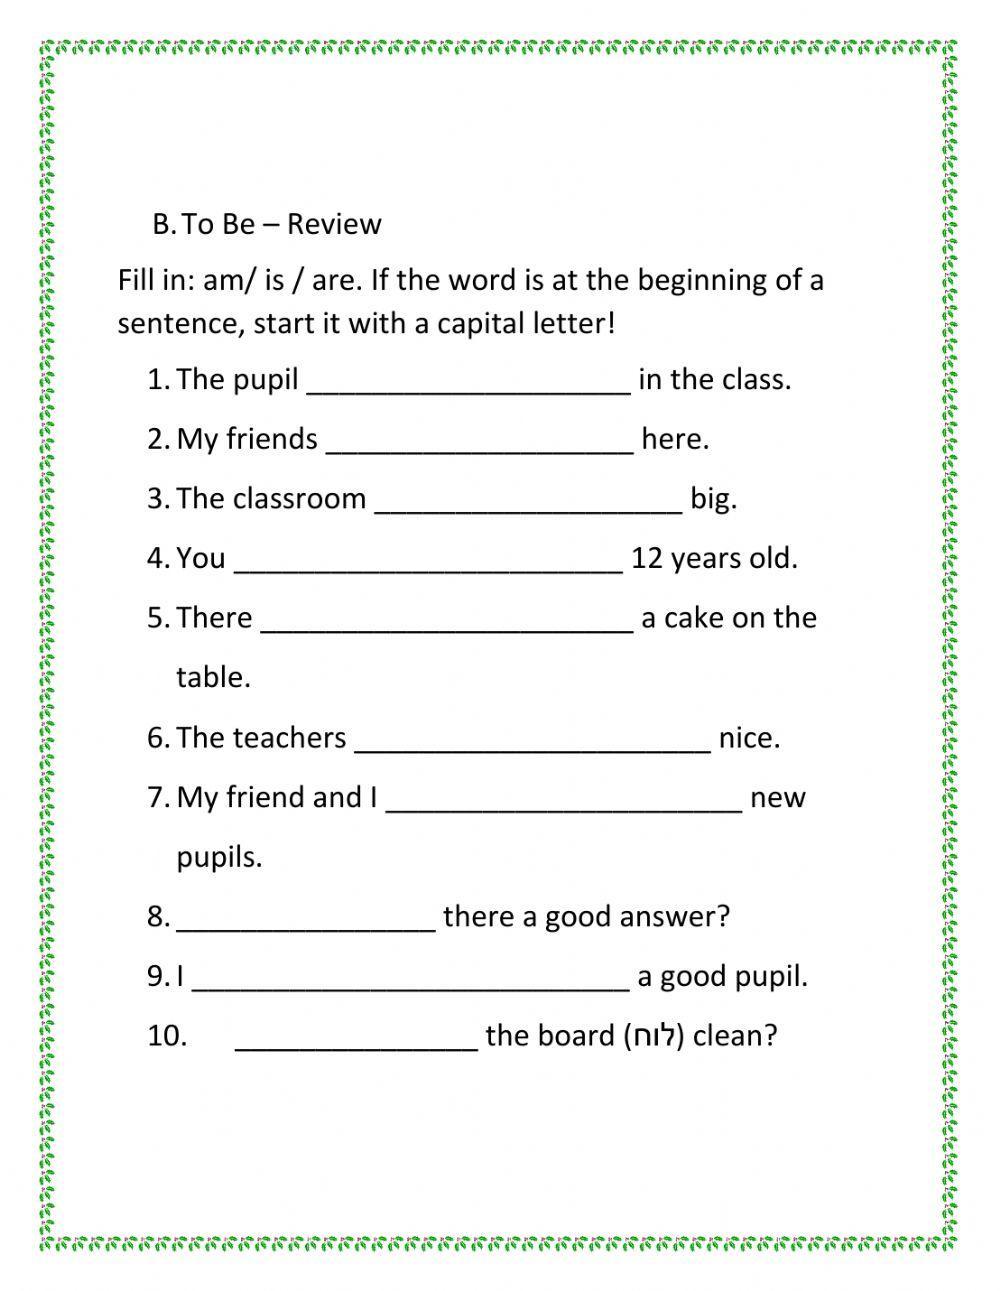 7th grade review 1